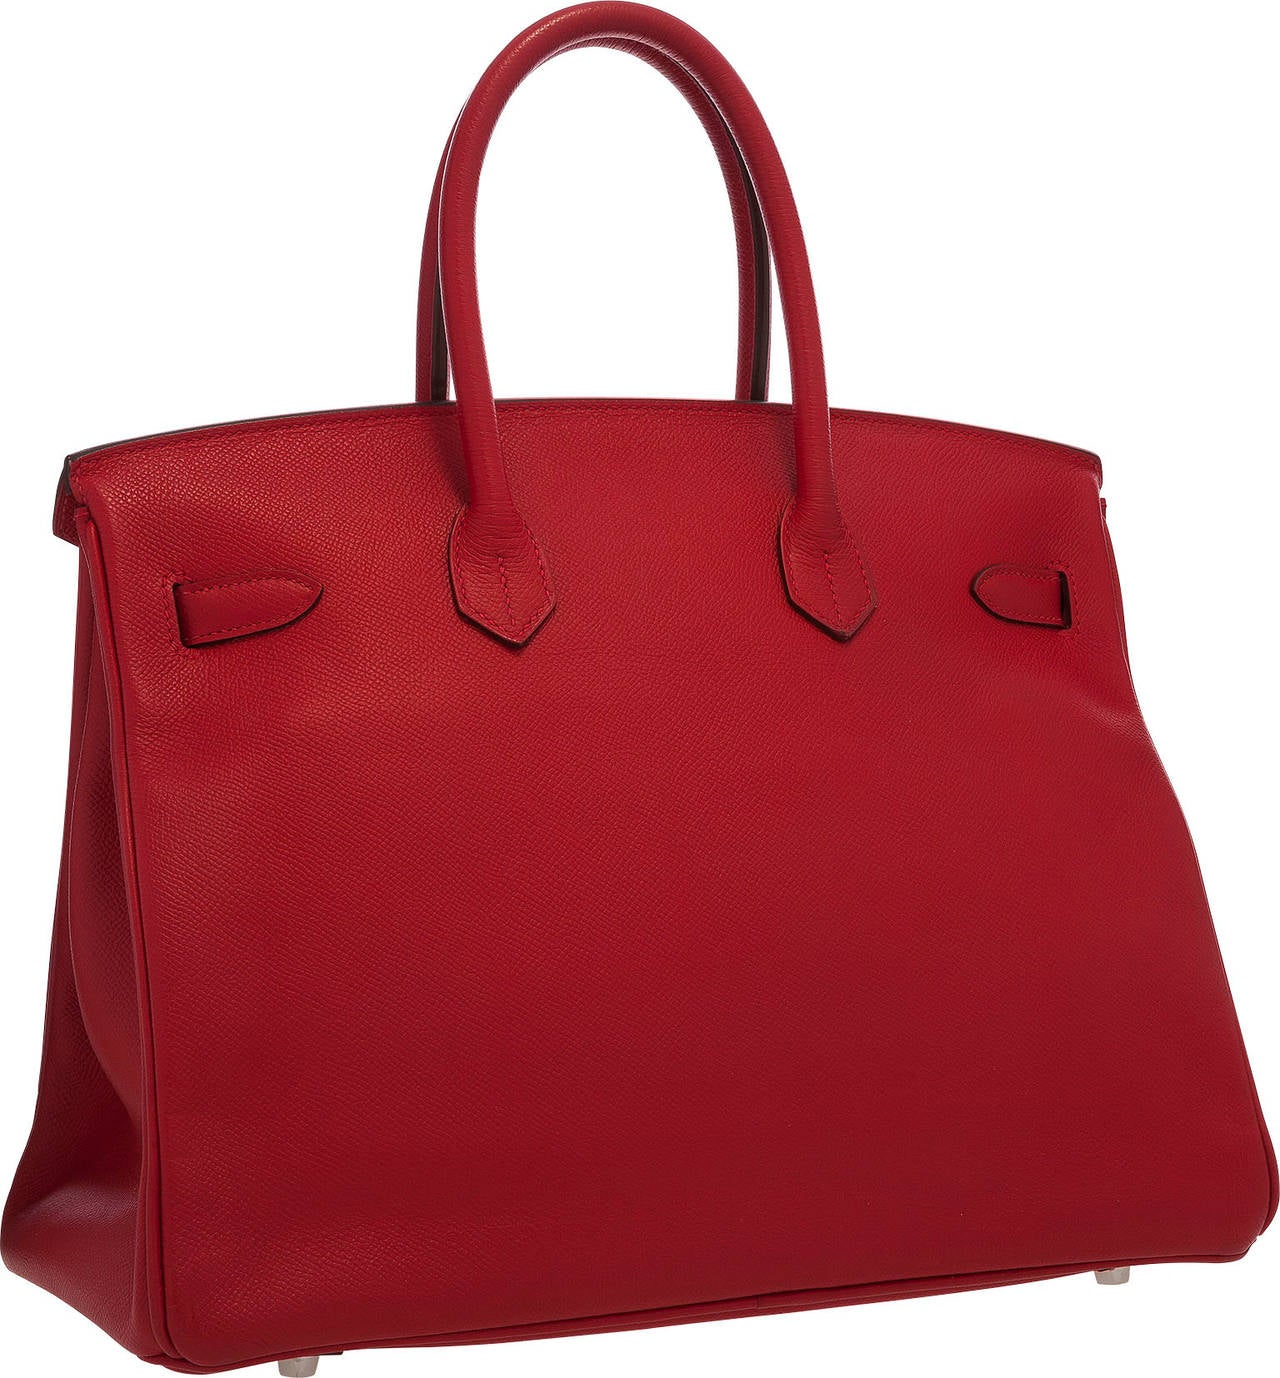 Hermes 35cm Rouge Casaque Epsom Leather Birkin Bag with Palladium Hardware In Excellent Condition For Sale In New York, NY